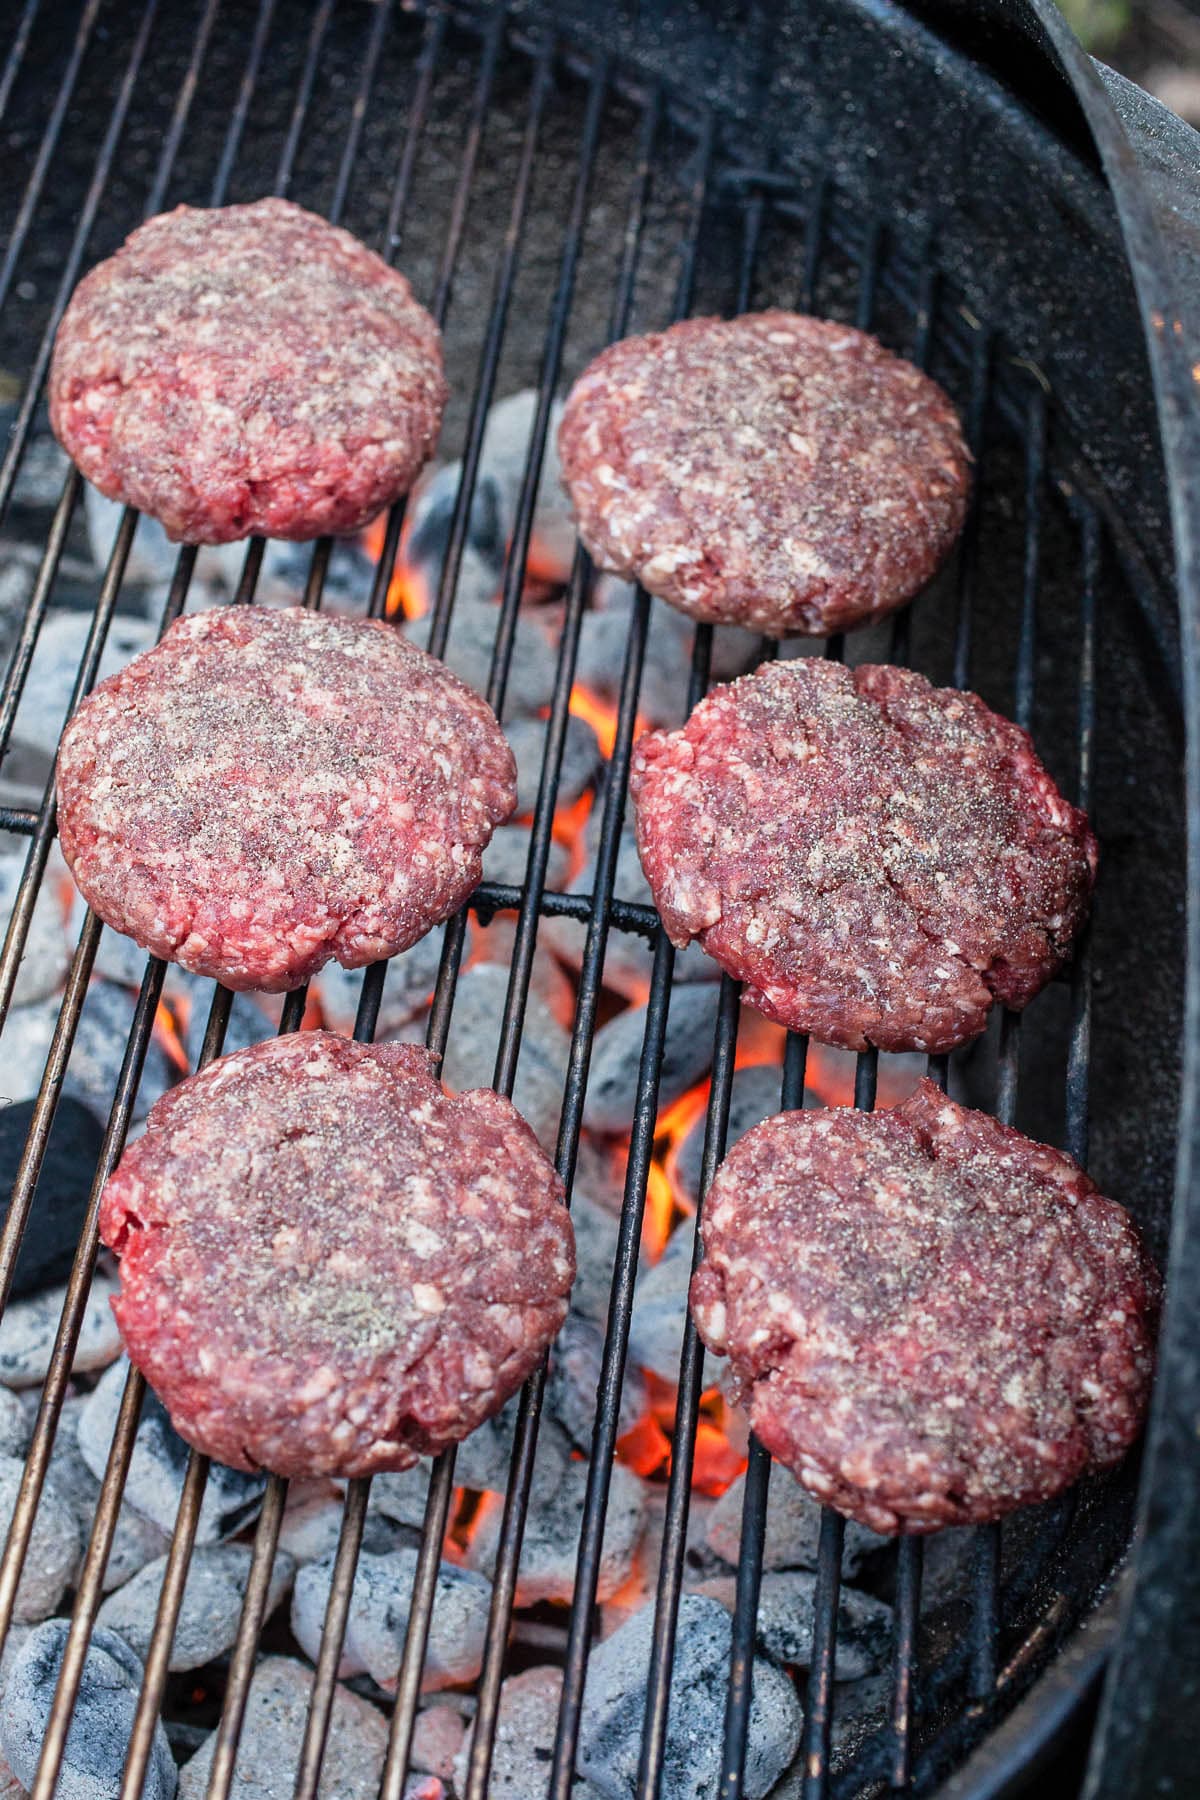 Ground beef patties cooking on Weber charcoal grill.